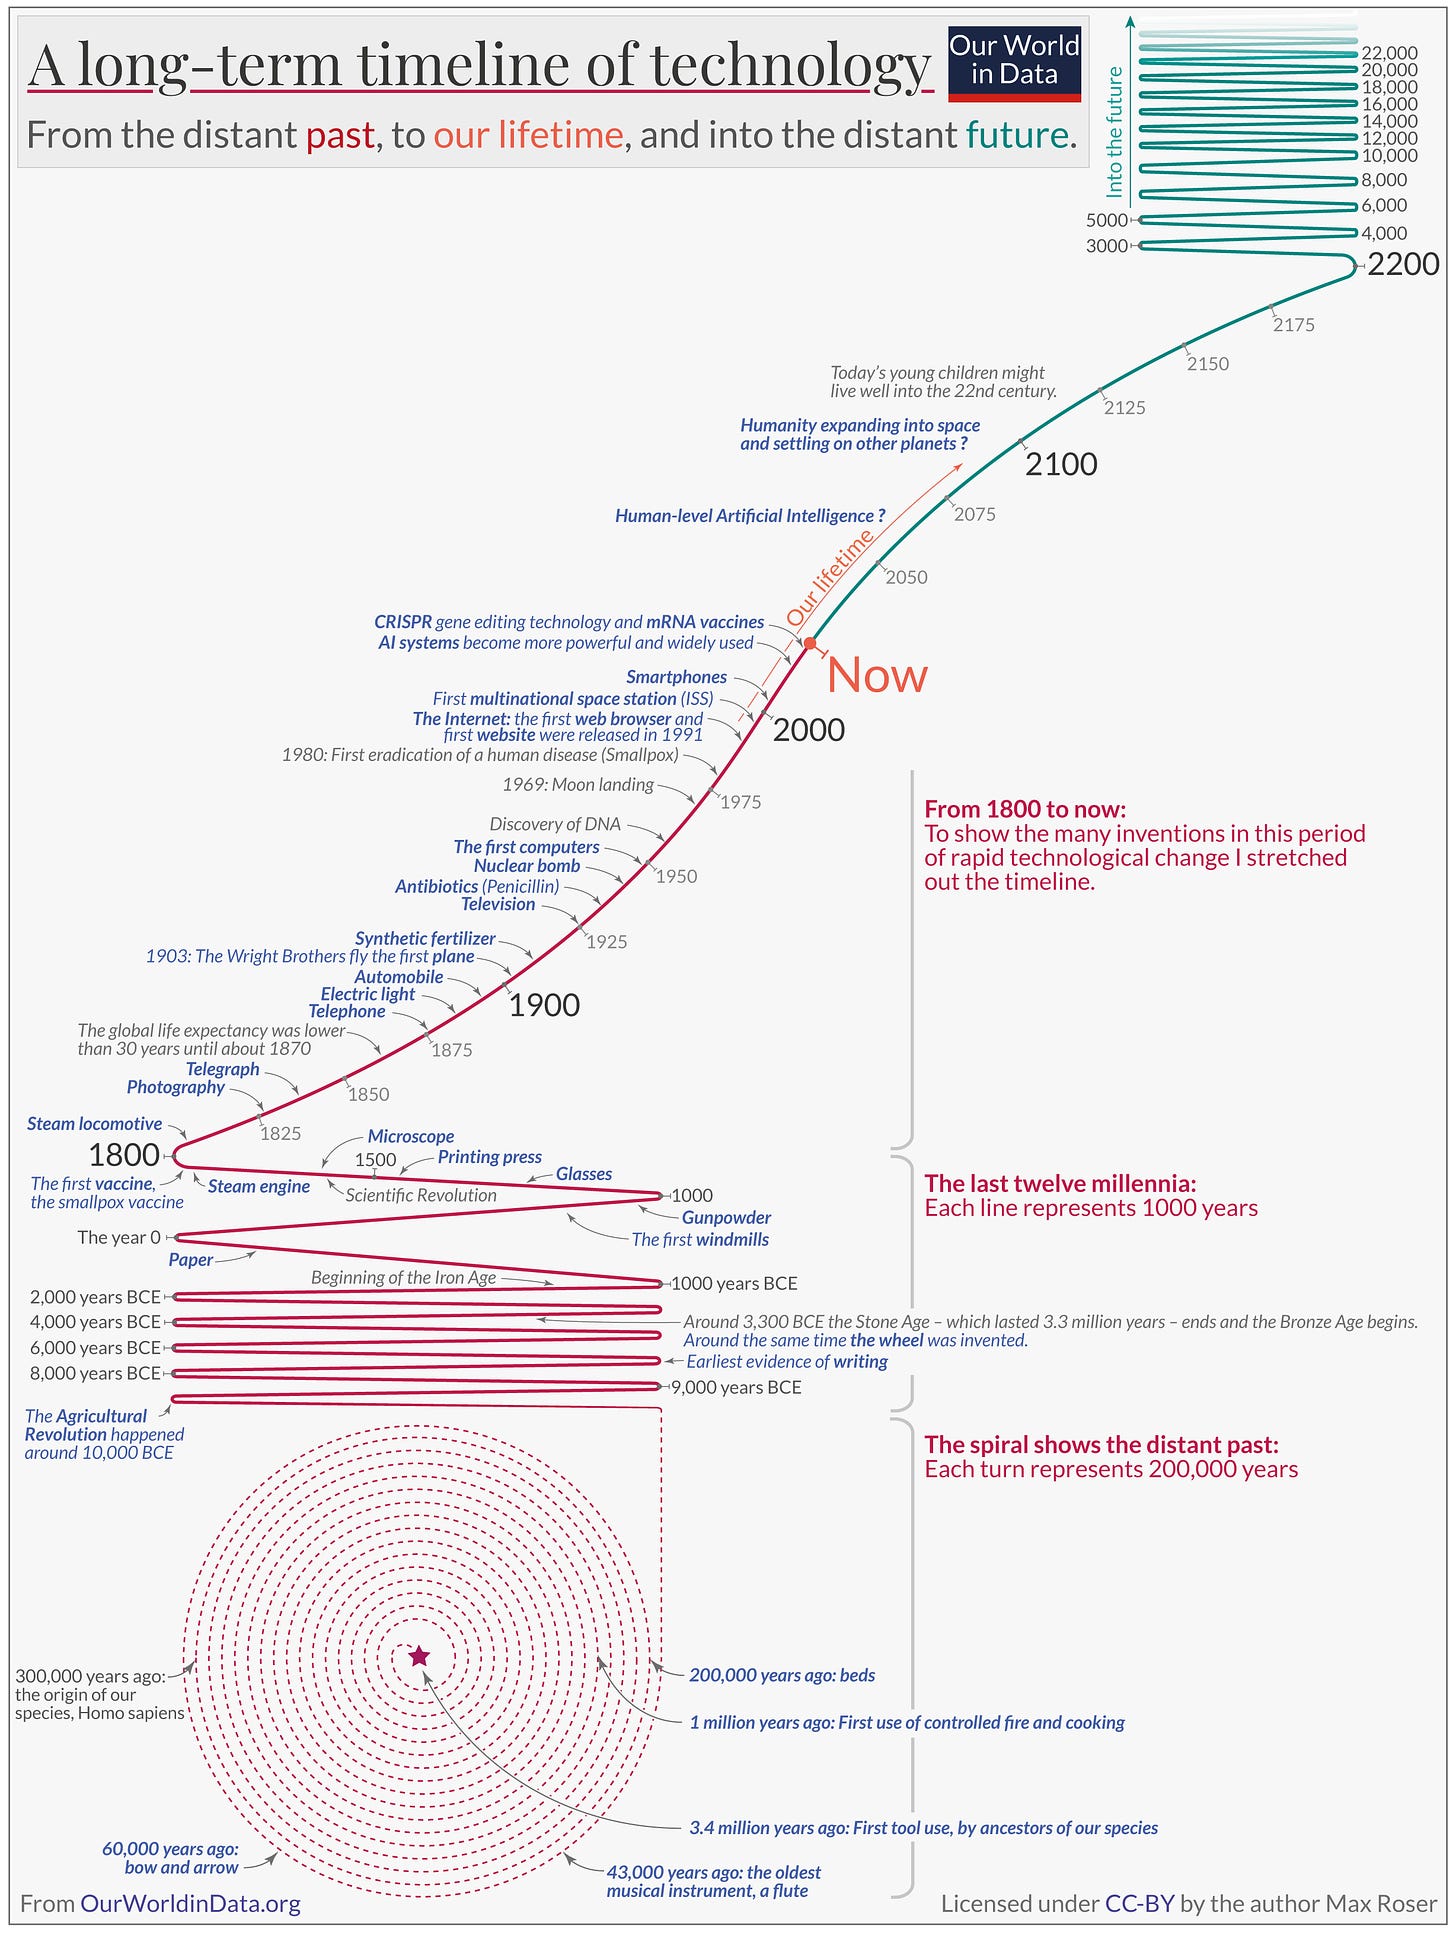 This large visualization highlights the wide range of technology’s impact on our lives.